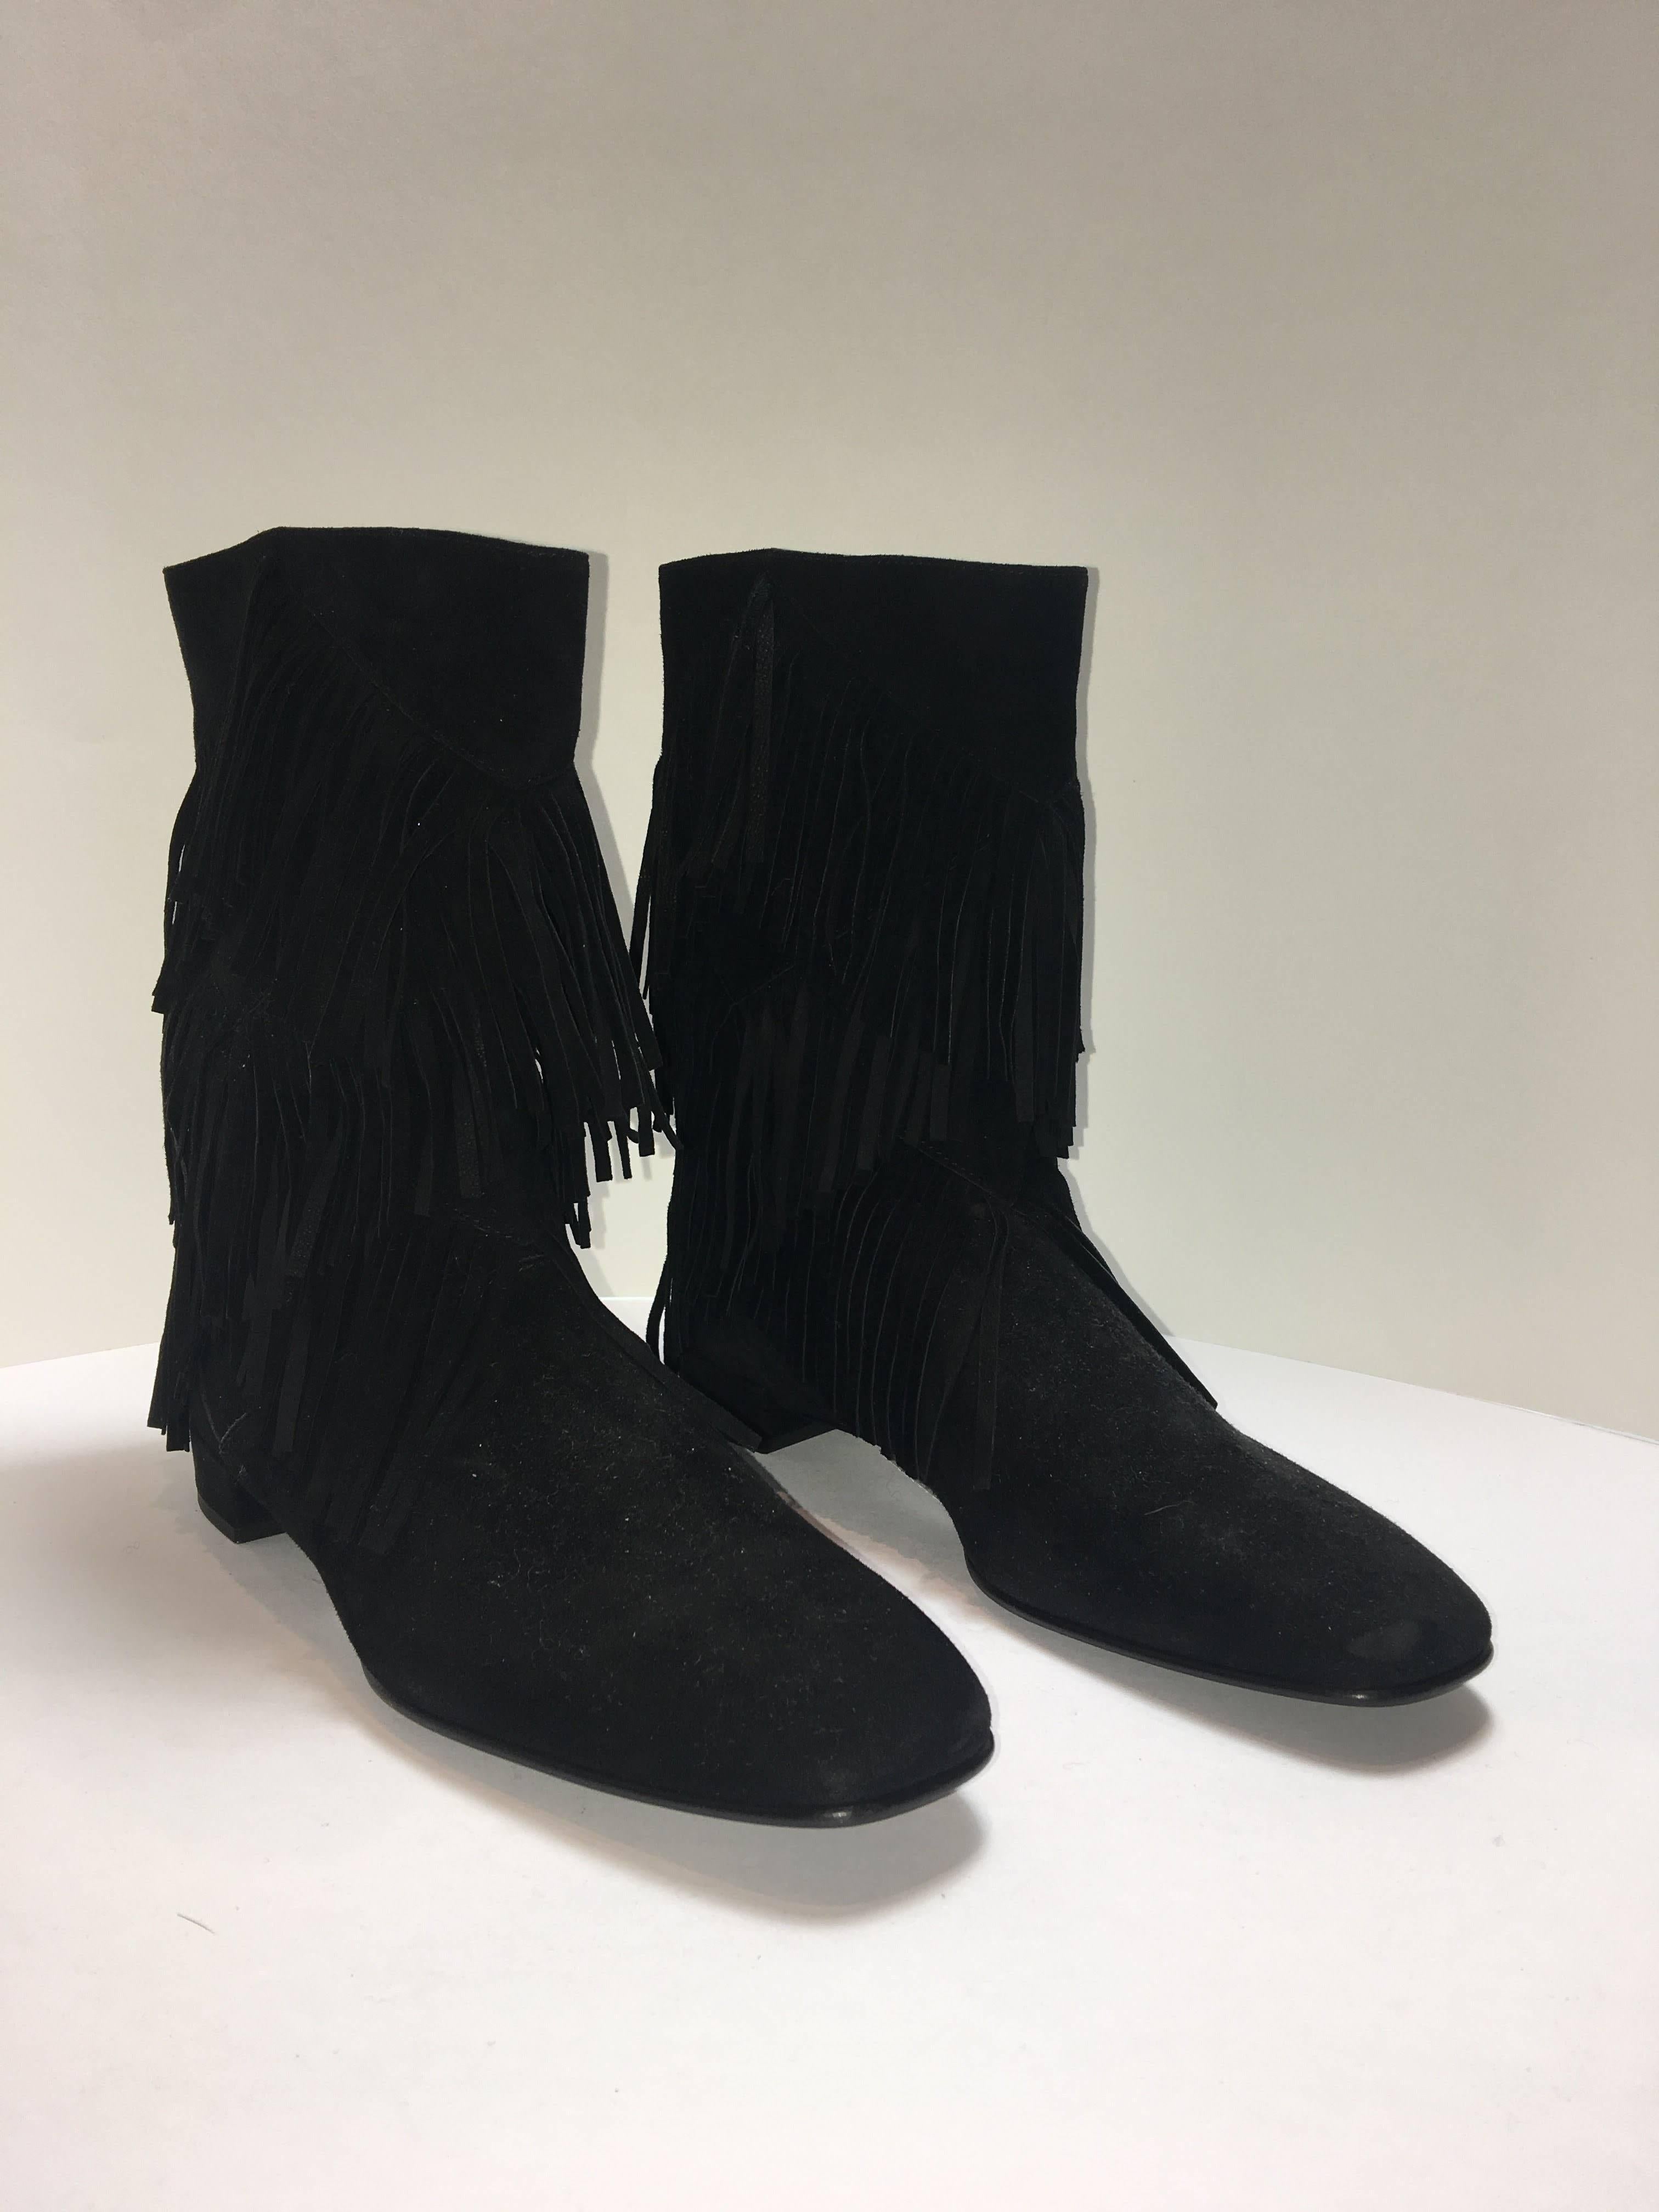 Roger Vivier Black Suede Fringed Boot. Size 37 with a square toe. 